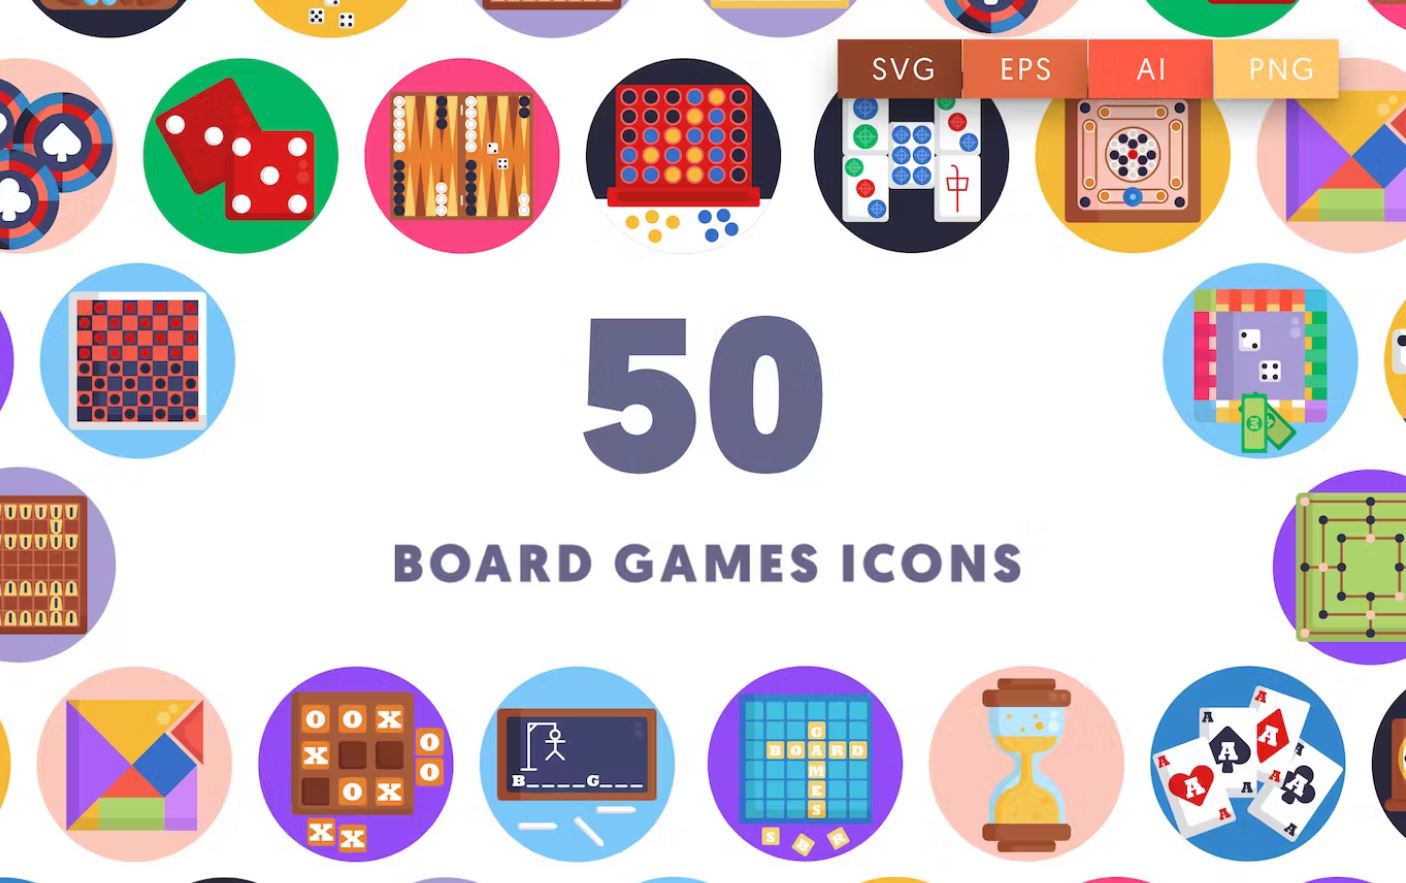 Board-Game-Cards-Icons